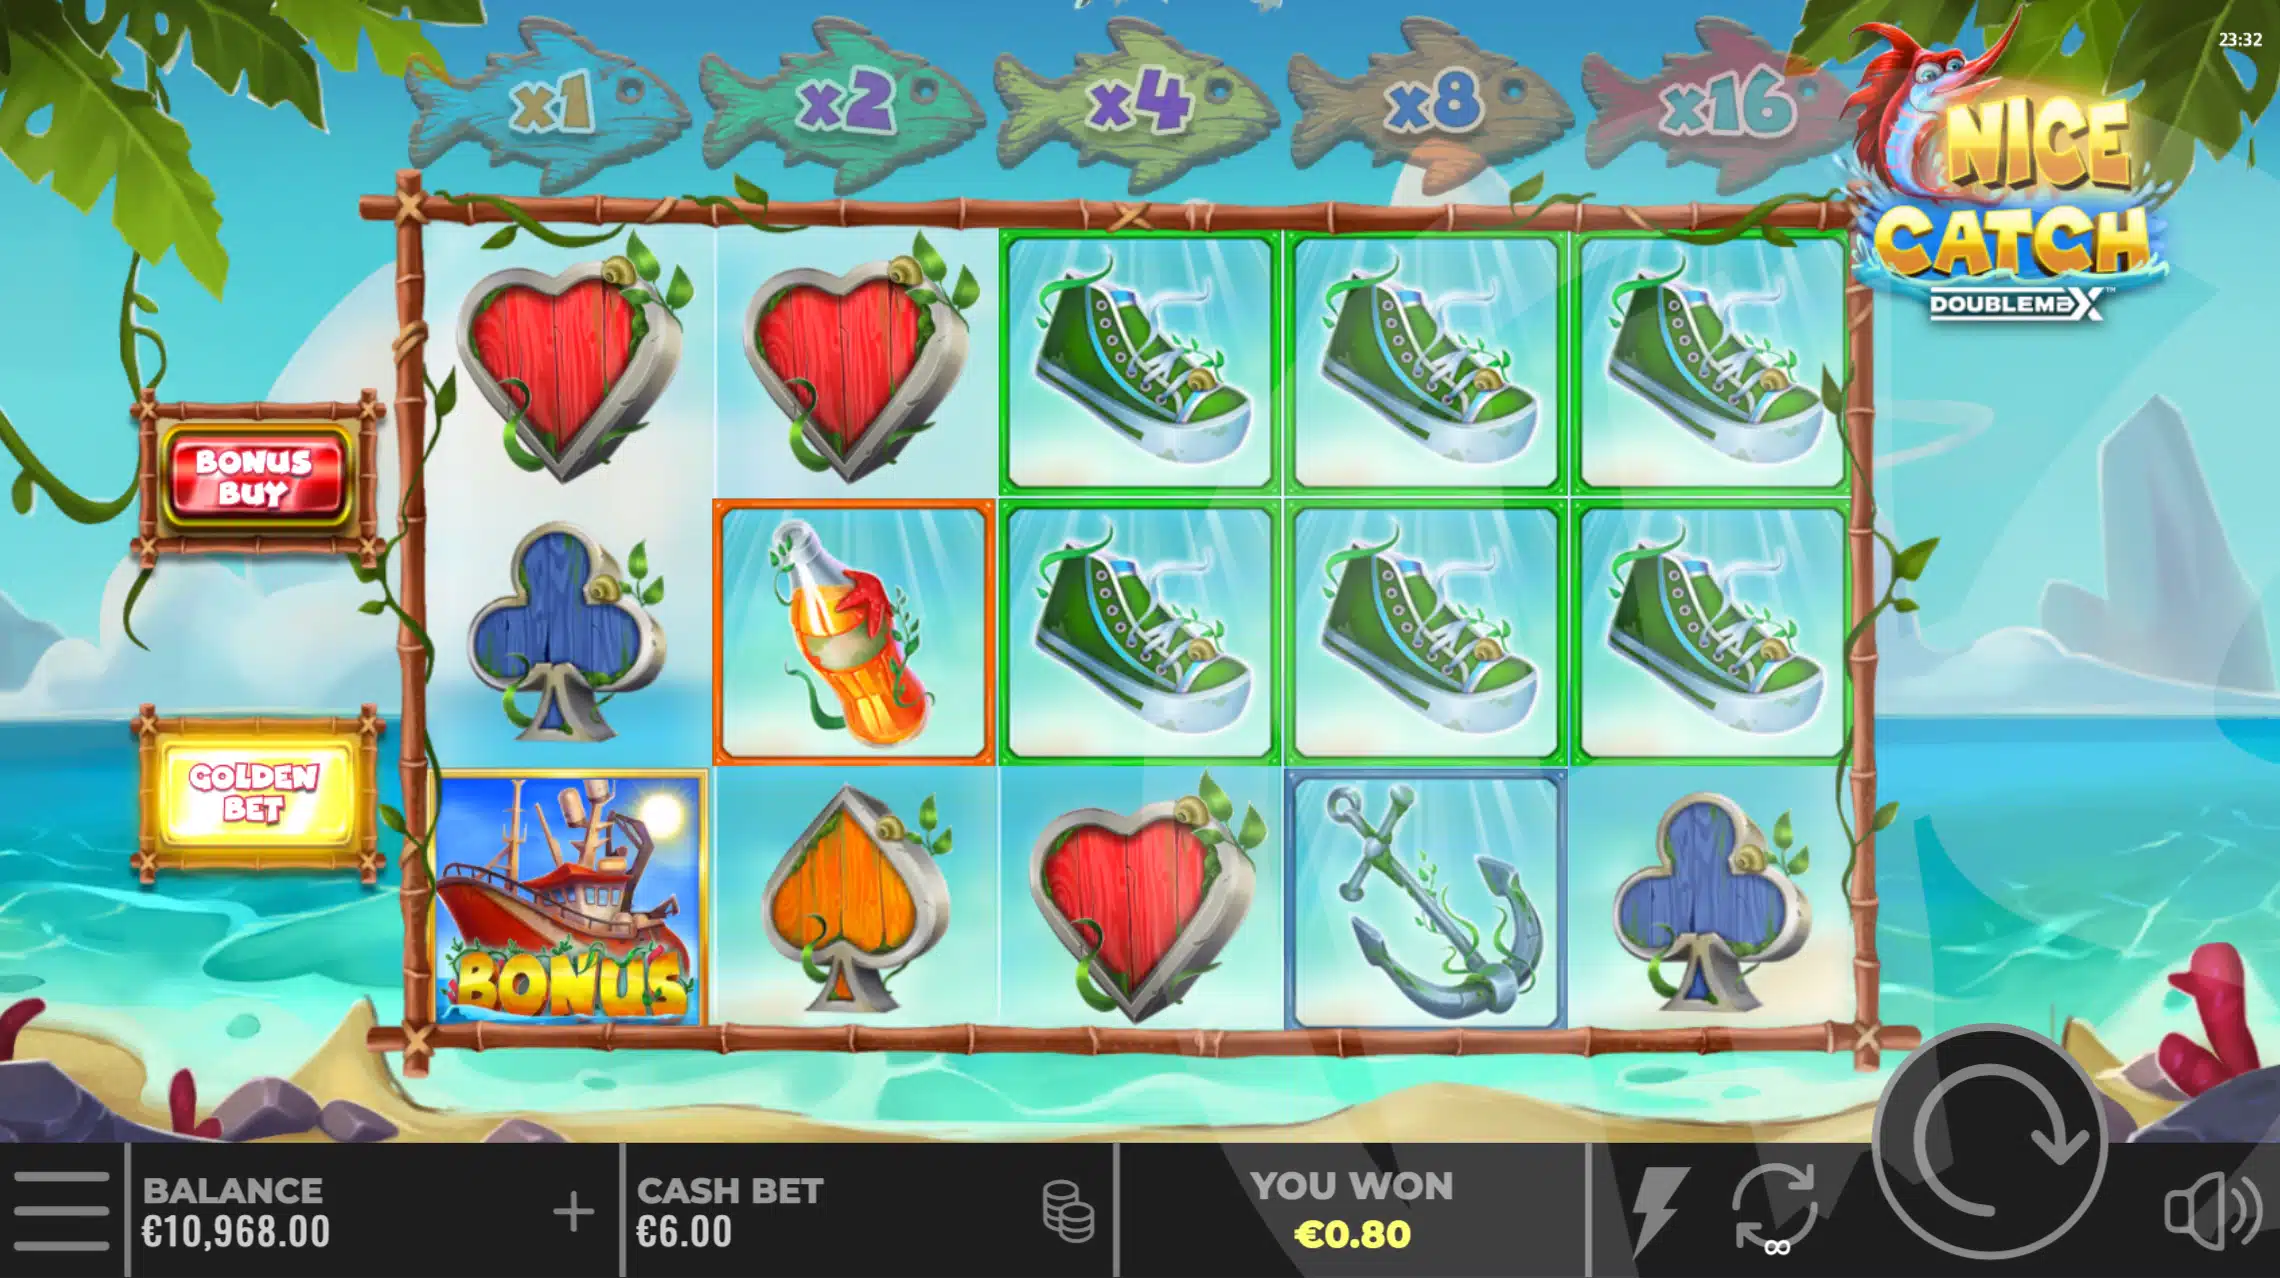 Nice Catch DoubleMax Offers Players 243 Ways to Win